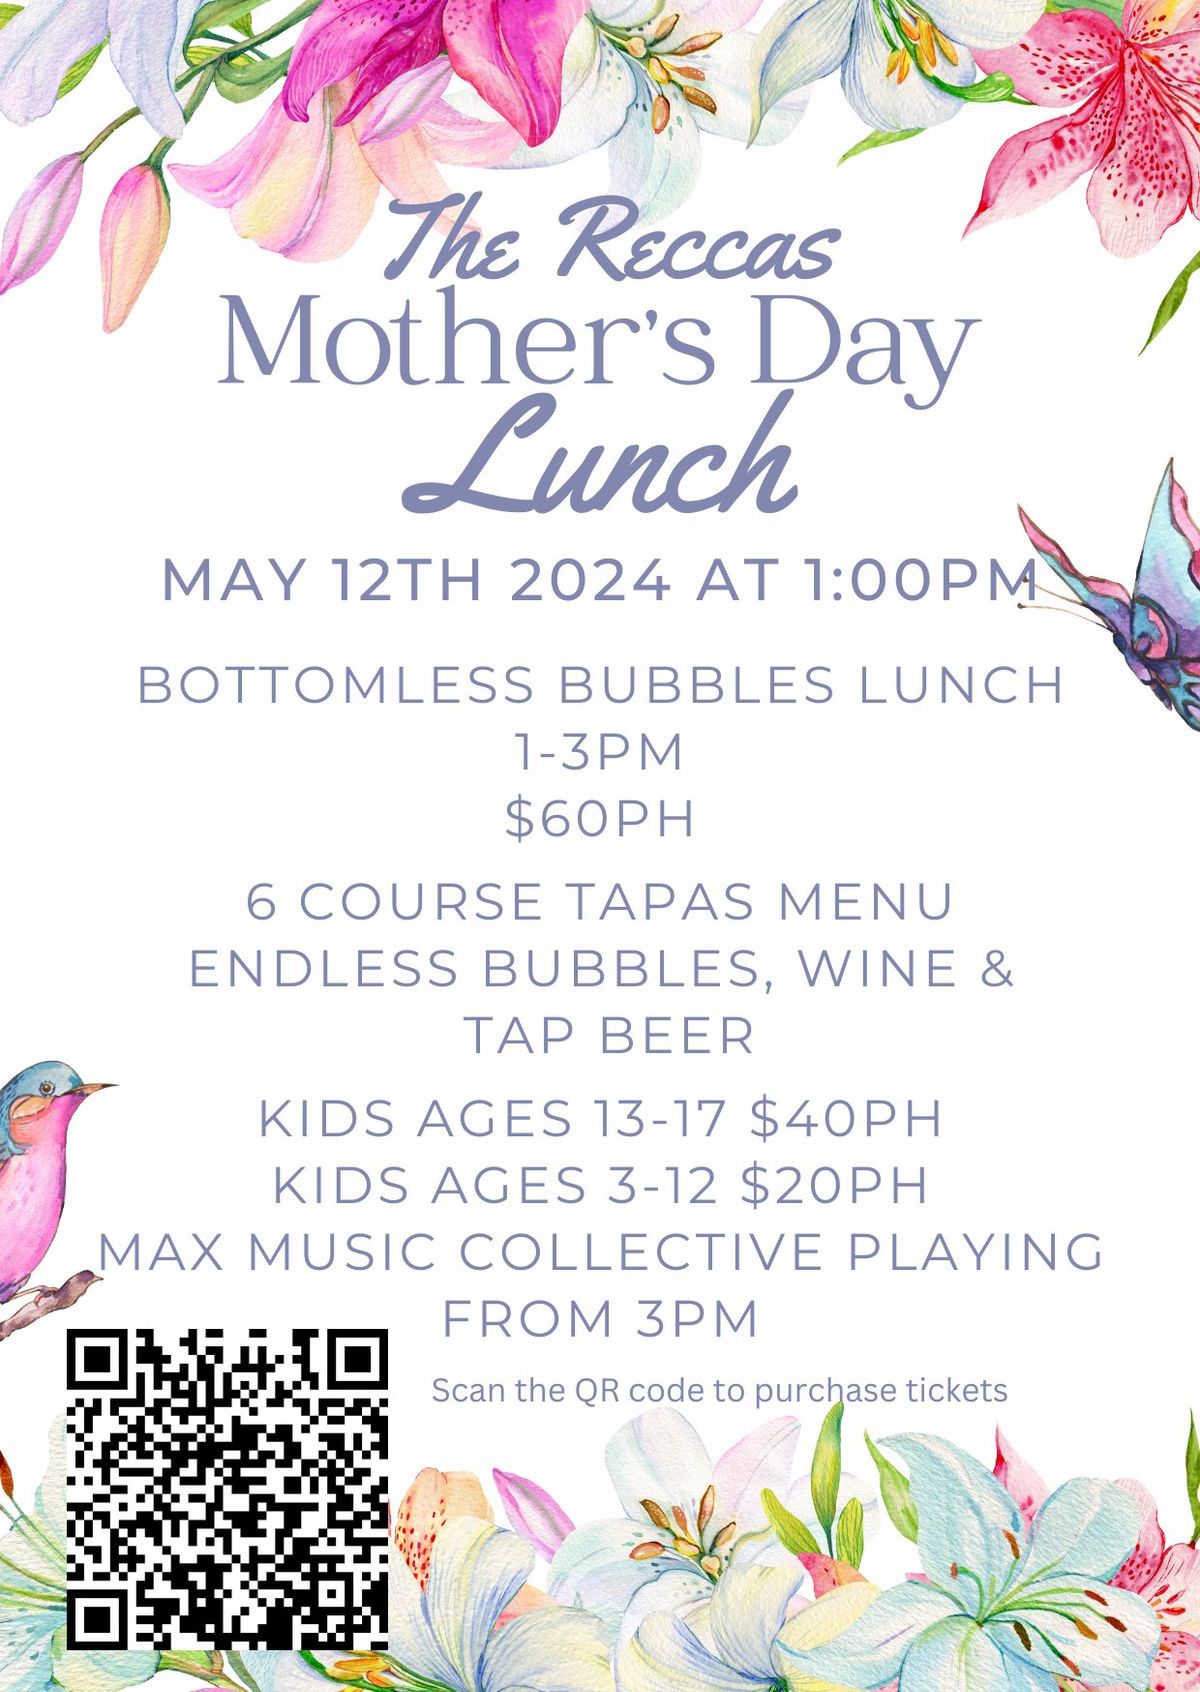 Mothers Day at The Reccas